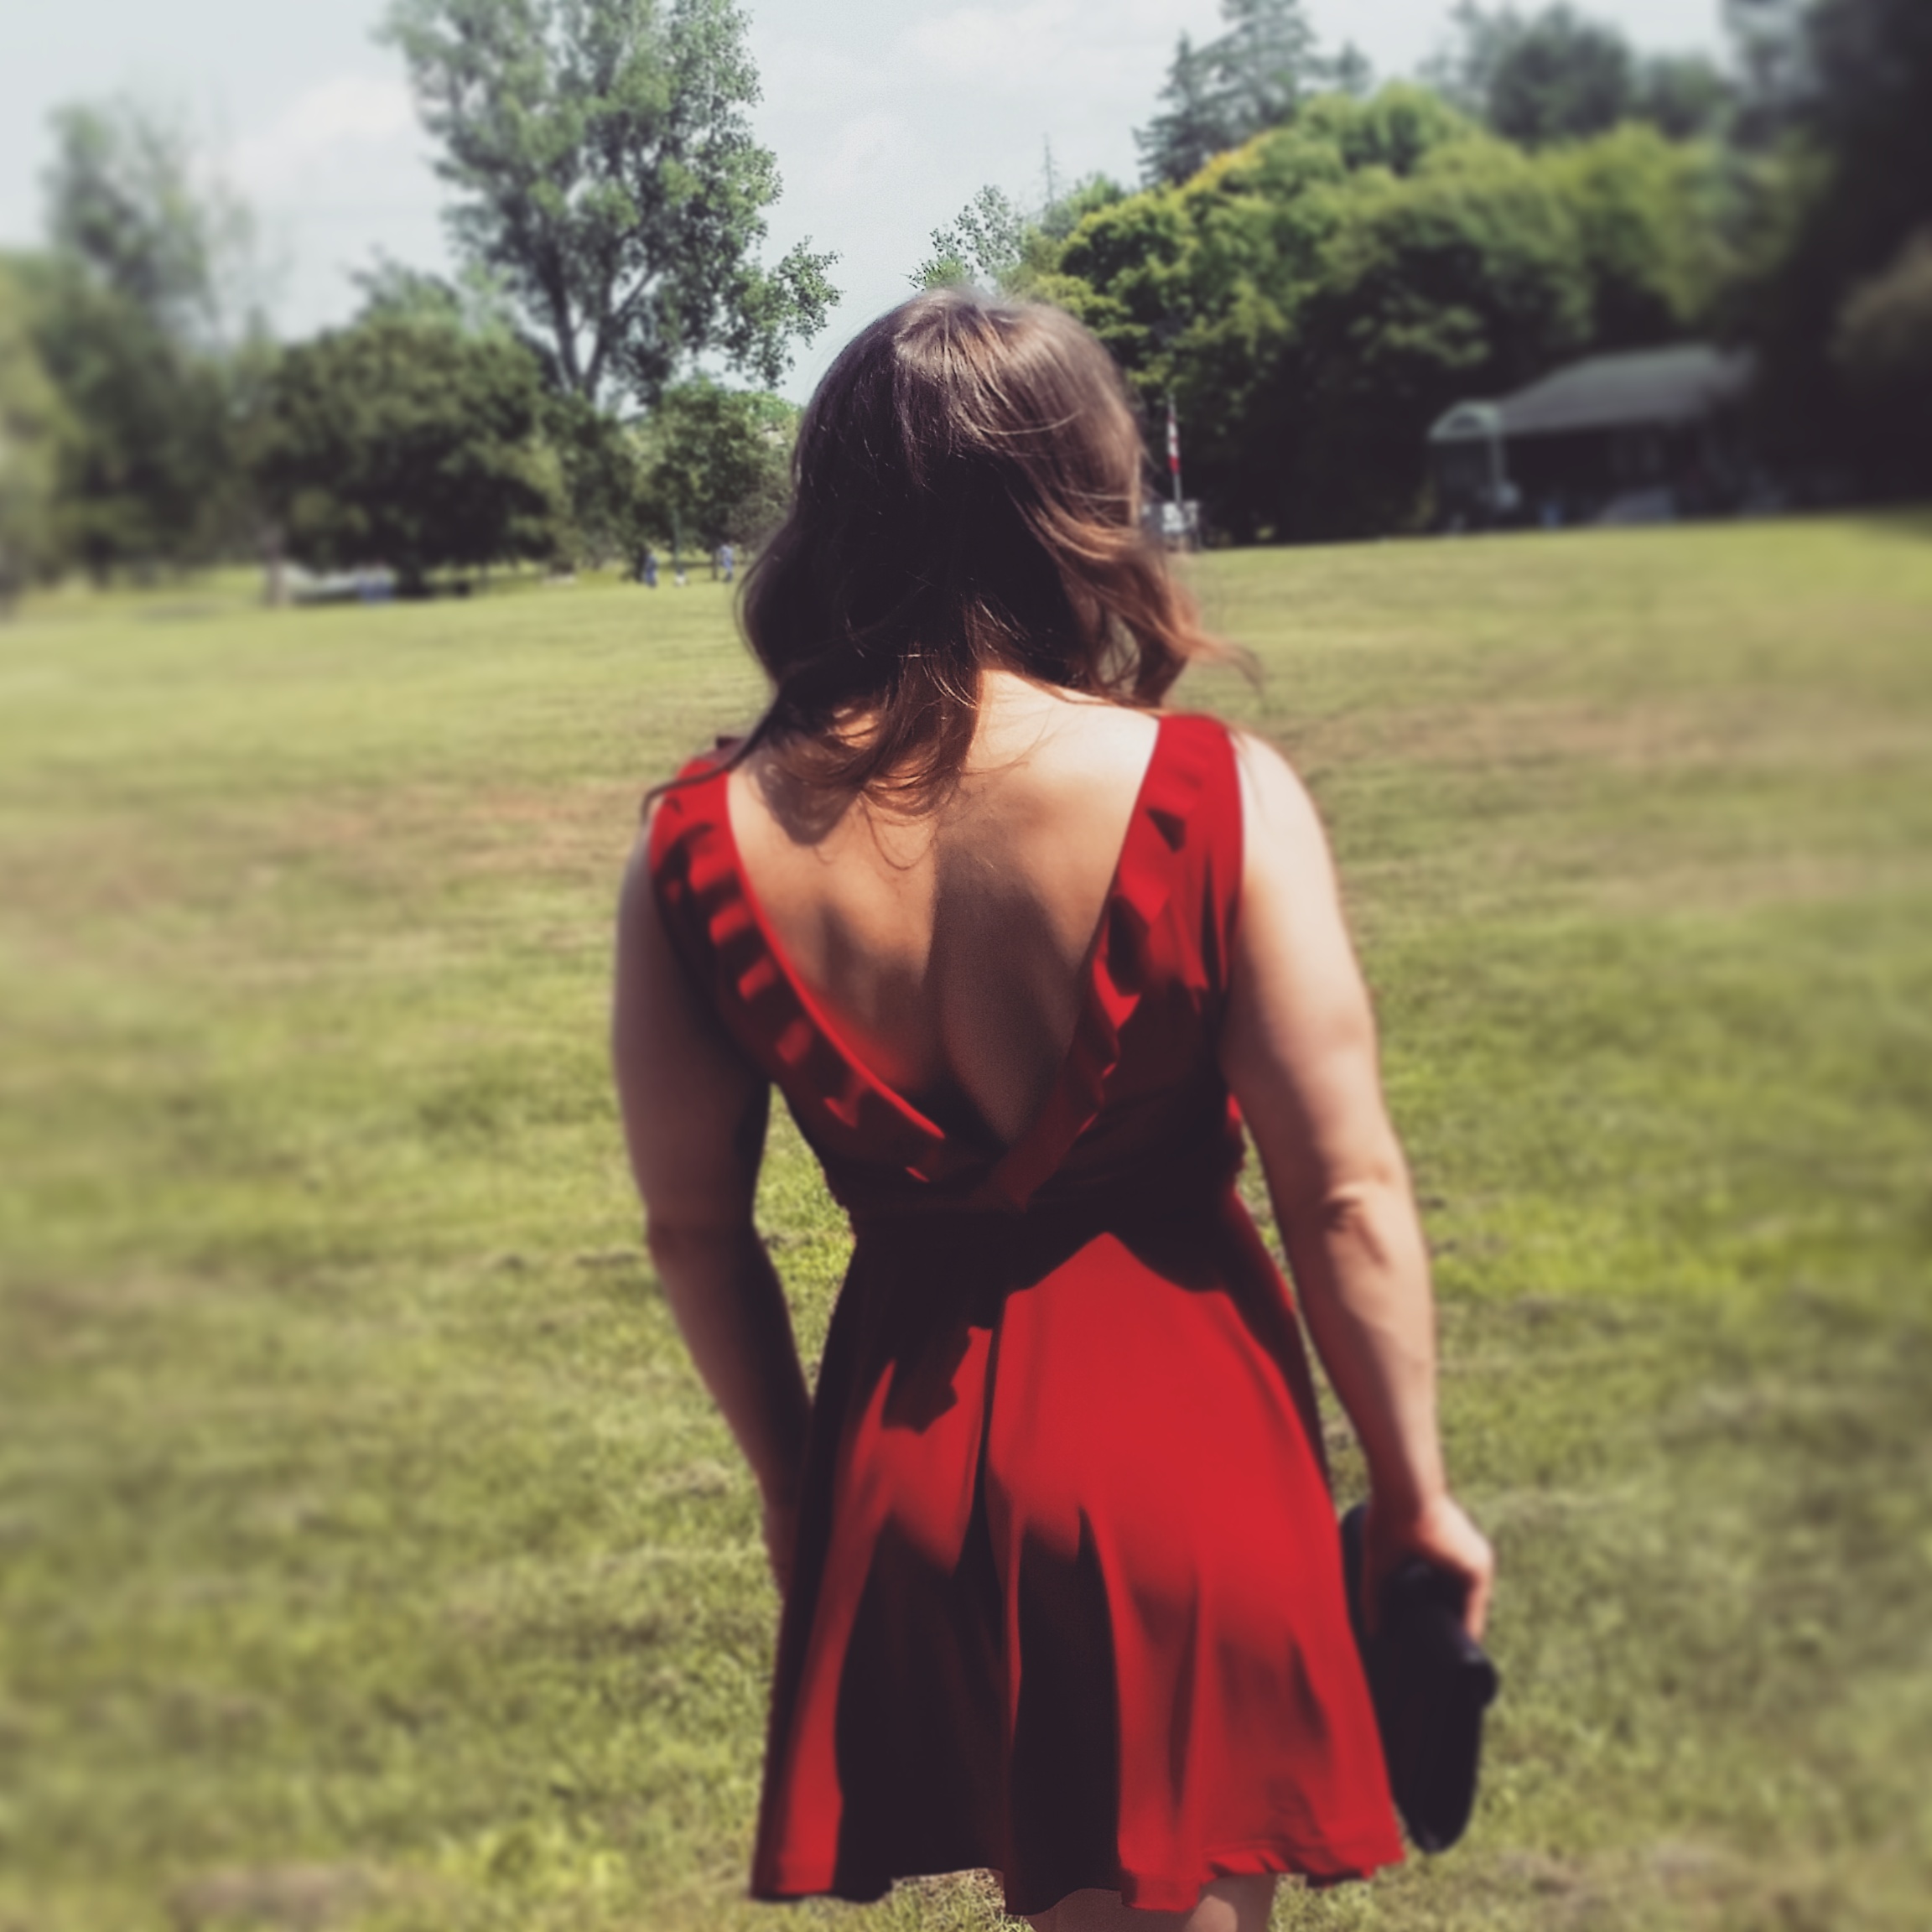 A powerlifter in a red dress